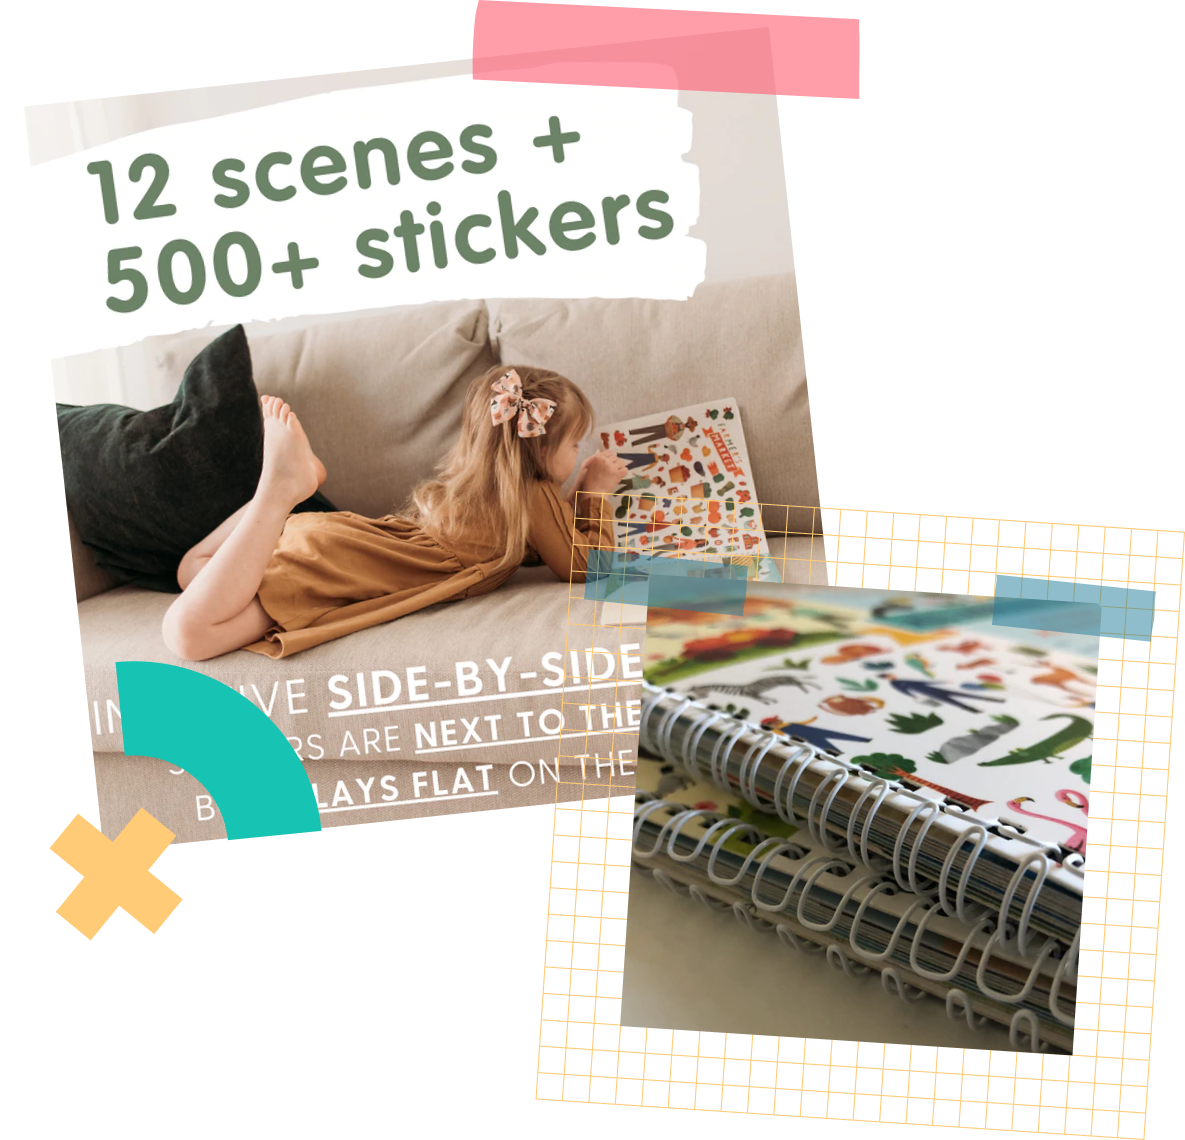 Great Food Truck Sticker Coloring Book 500 Stickers & 12 Scenes by Cupkin  Side by Side Activity Book Fun Sticker Books for Kids 2-4 